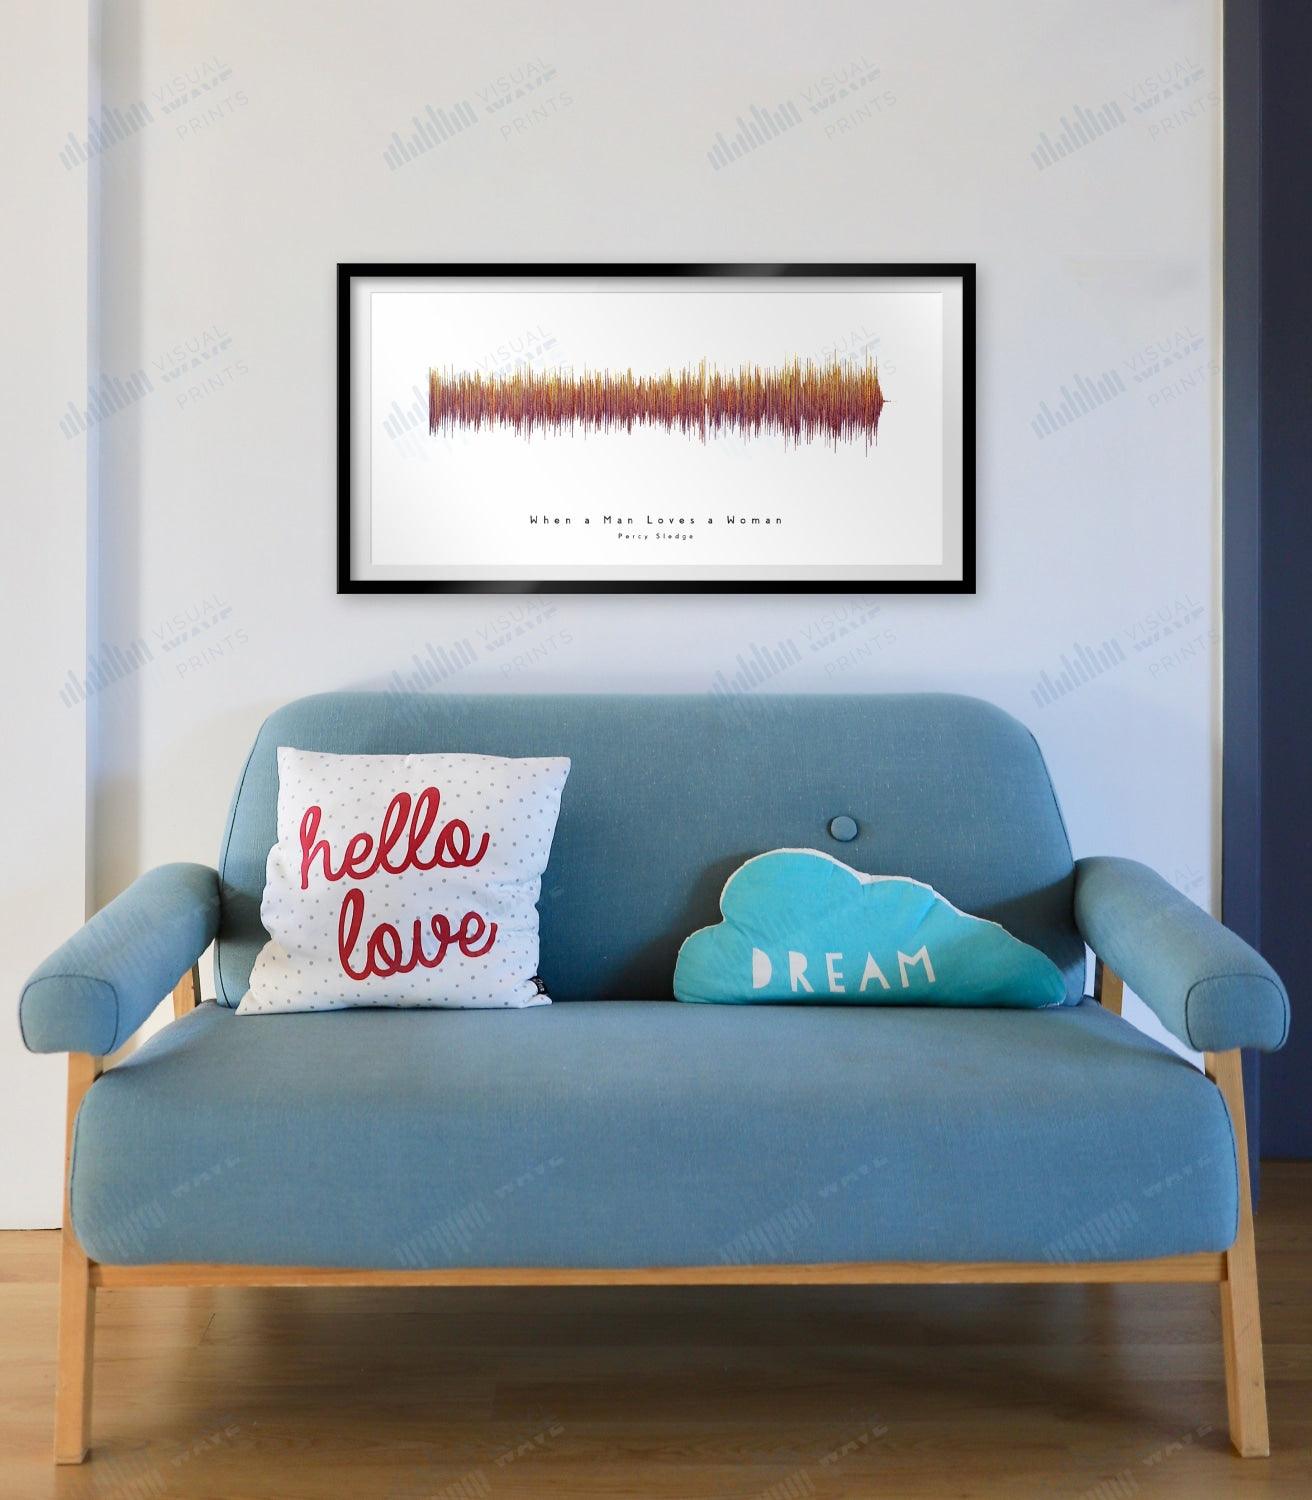 When a Man Loves a Woman by Percy Sledge - Visual Wave Prints